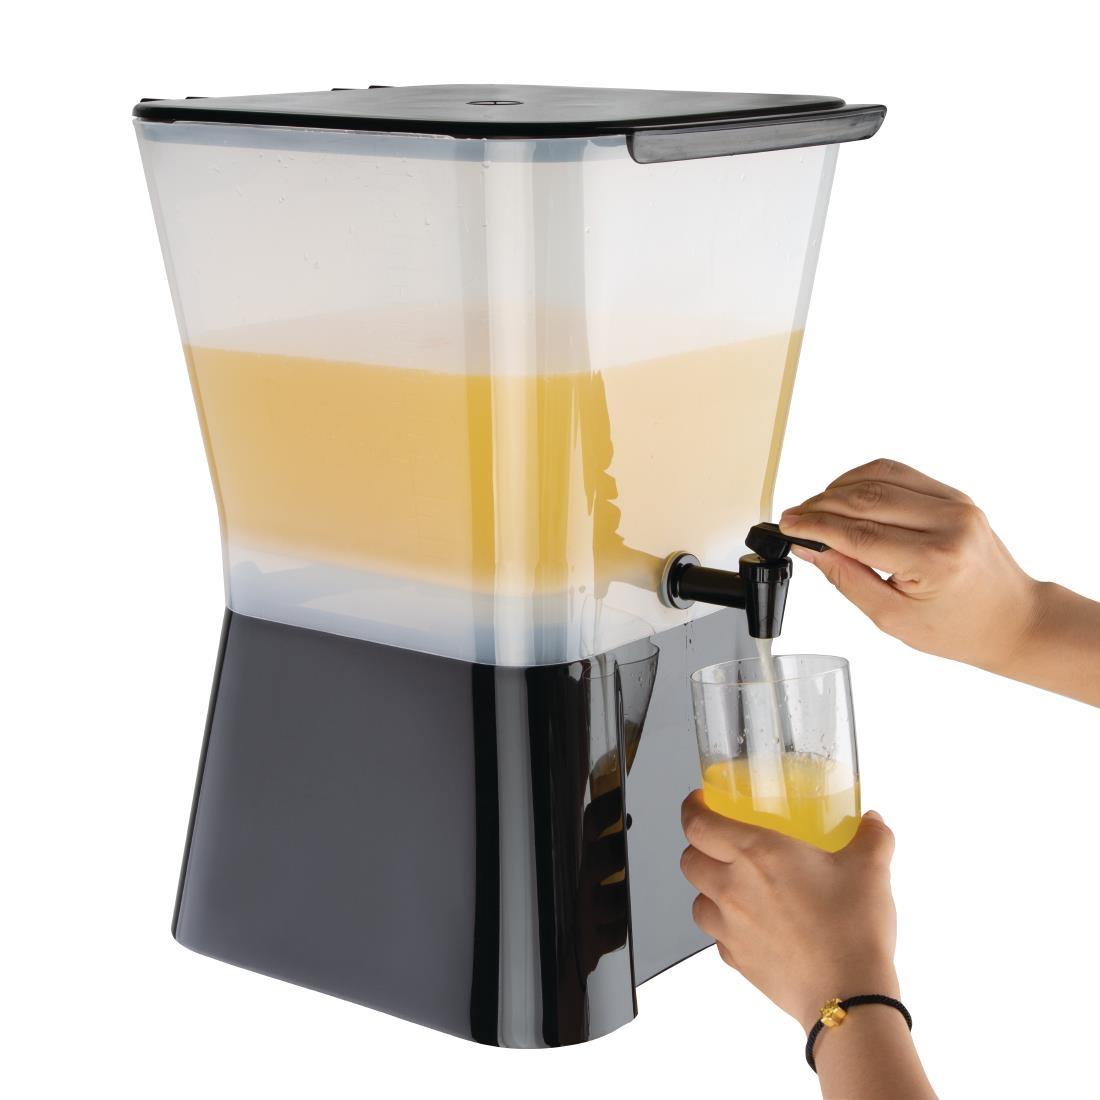 Olympia Budget Juice Dispenser with Stand - CG189  - 5